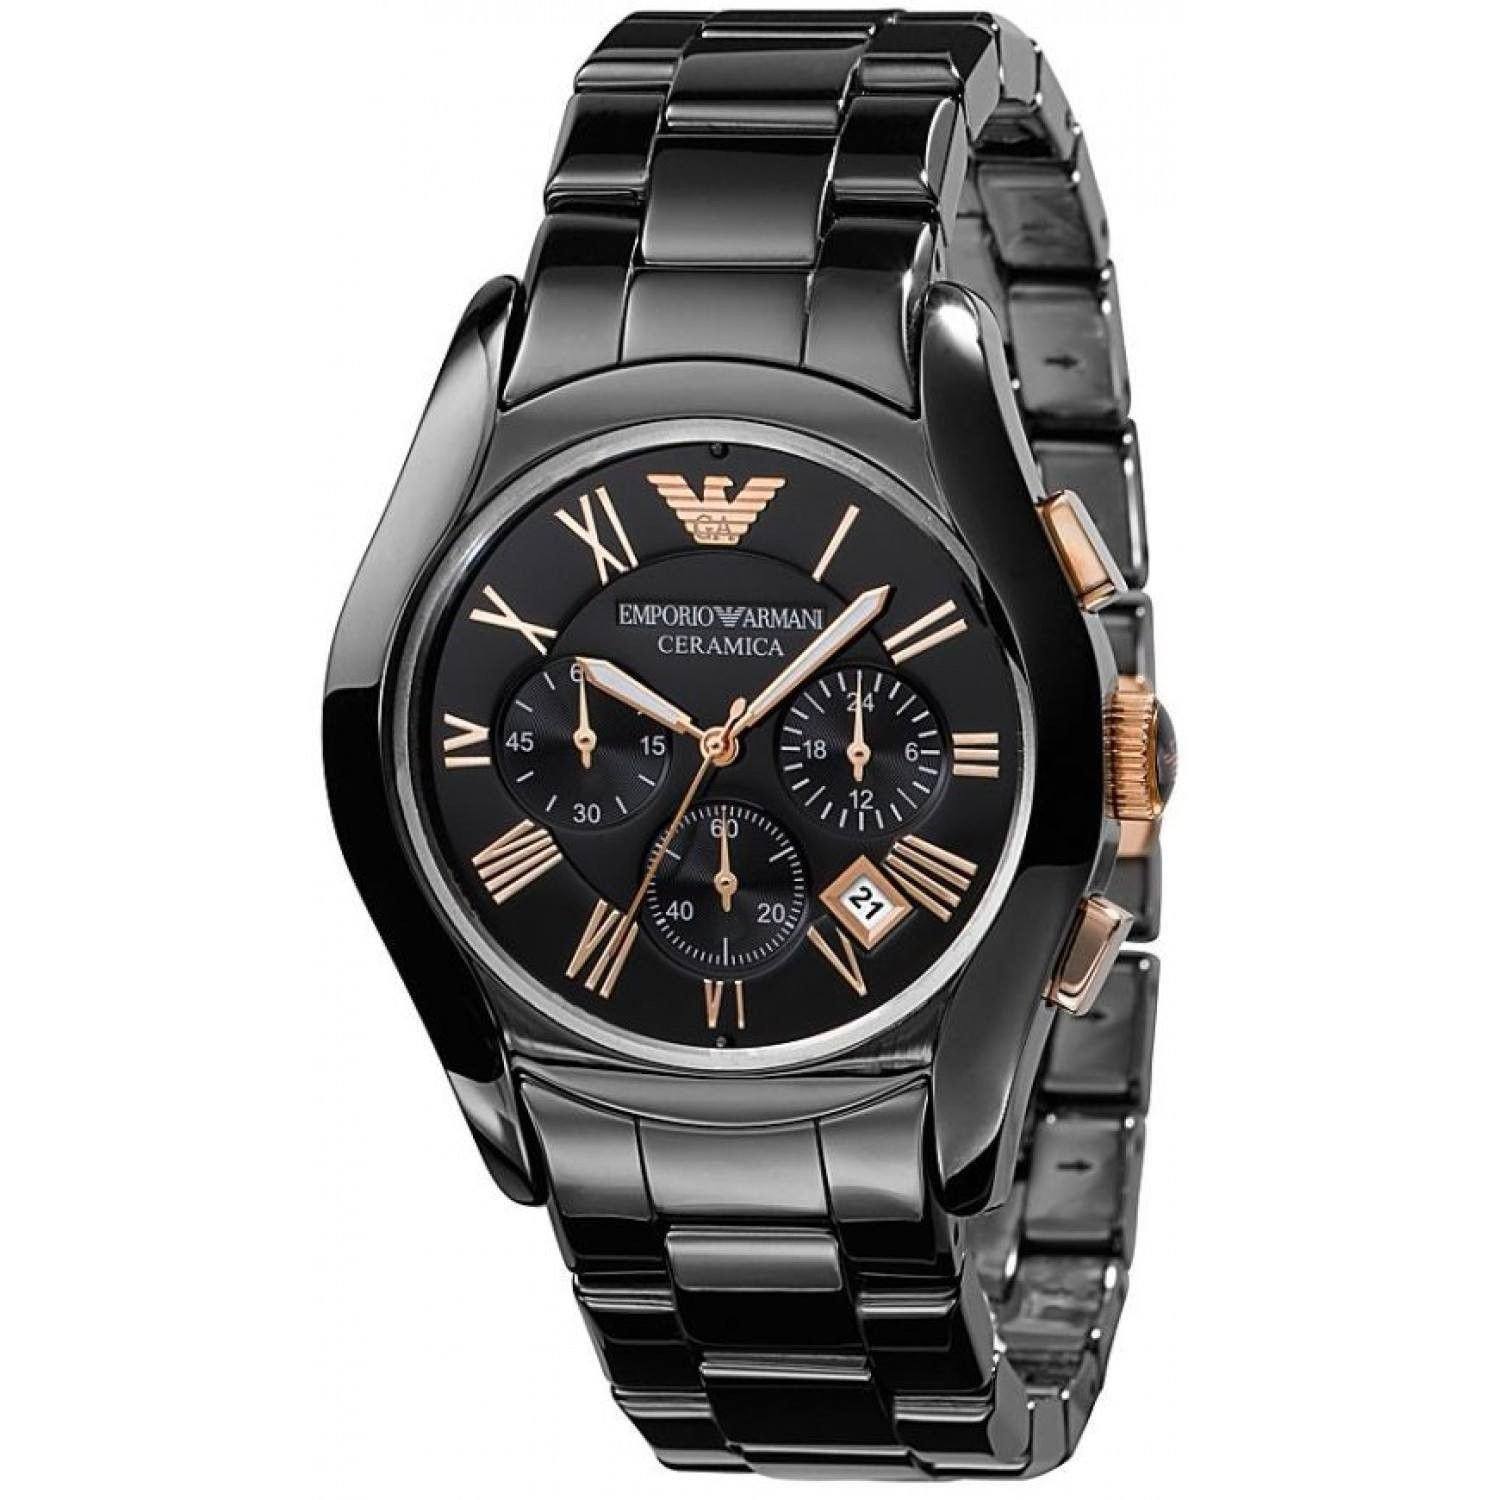 mens black and gold armani watch